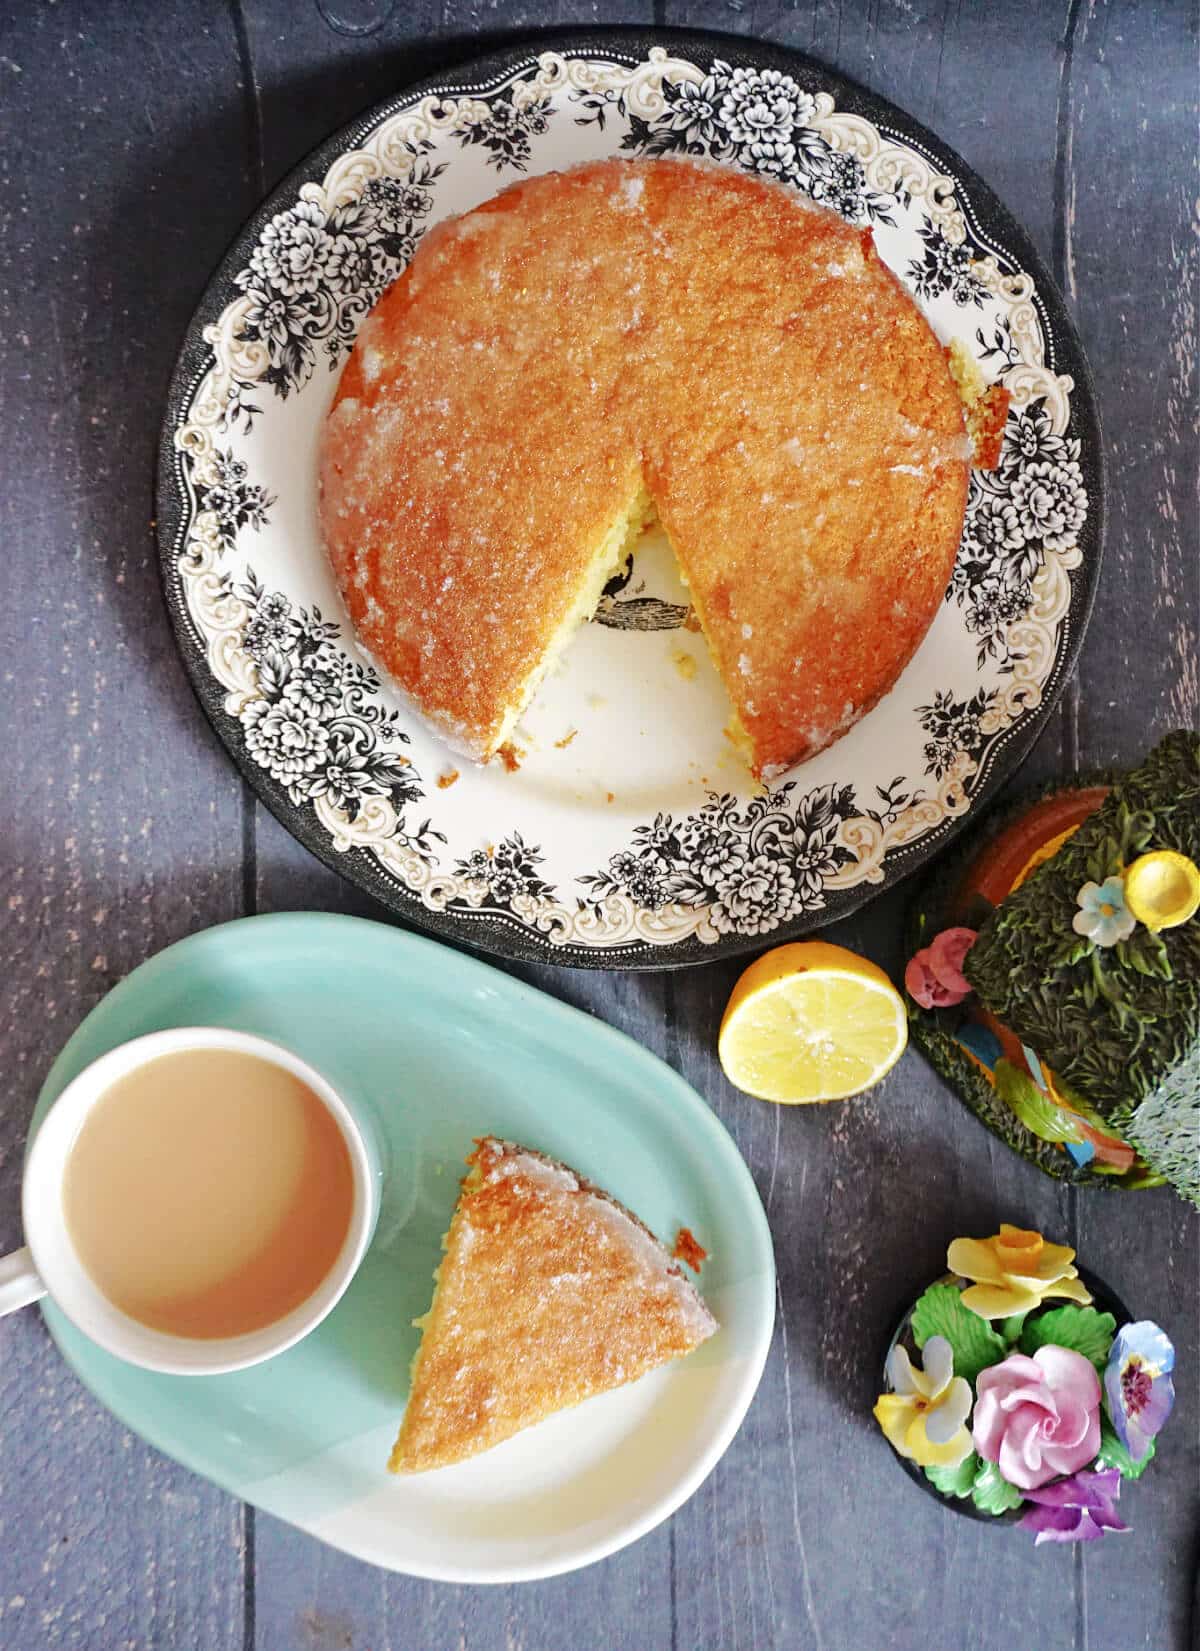 Overhead shoot of a plate with lemon drizzle cake, another plate with a cup of tea and a slice of cake, and some decorations around